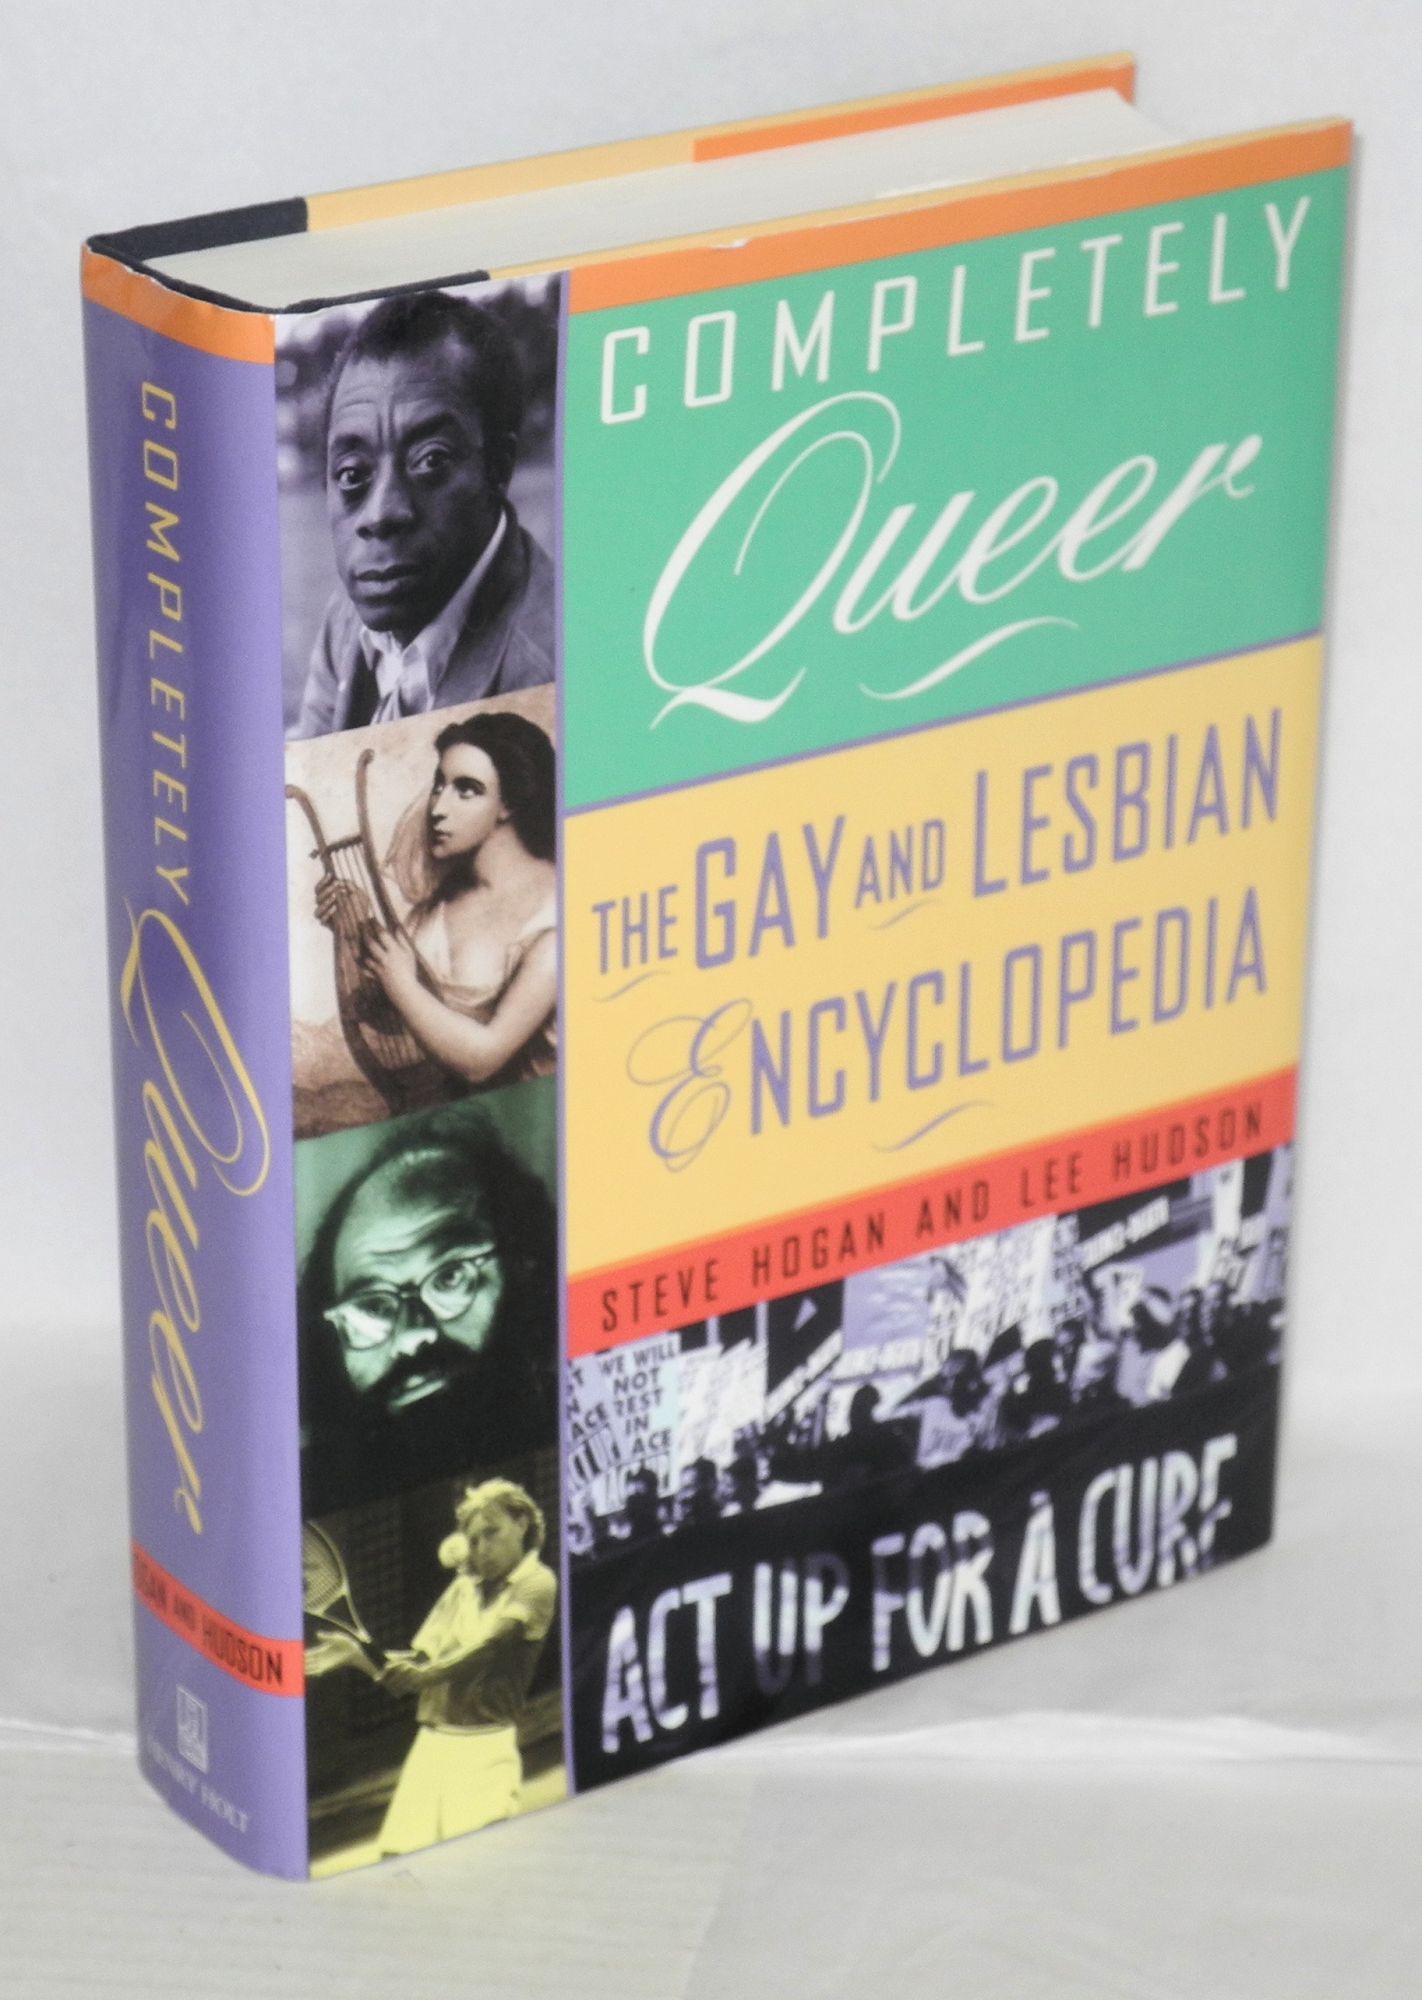 Completely encyclopedia gay lesbian queer